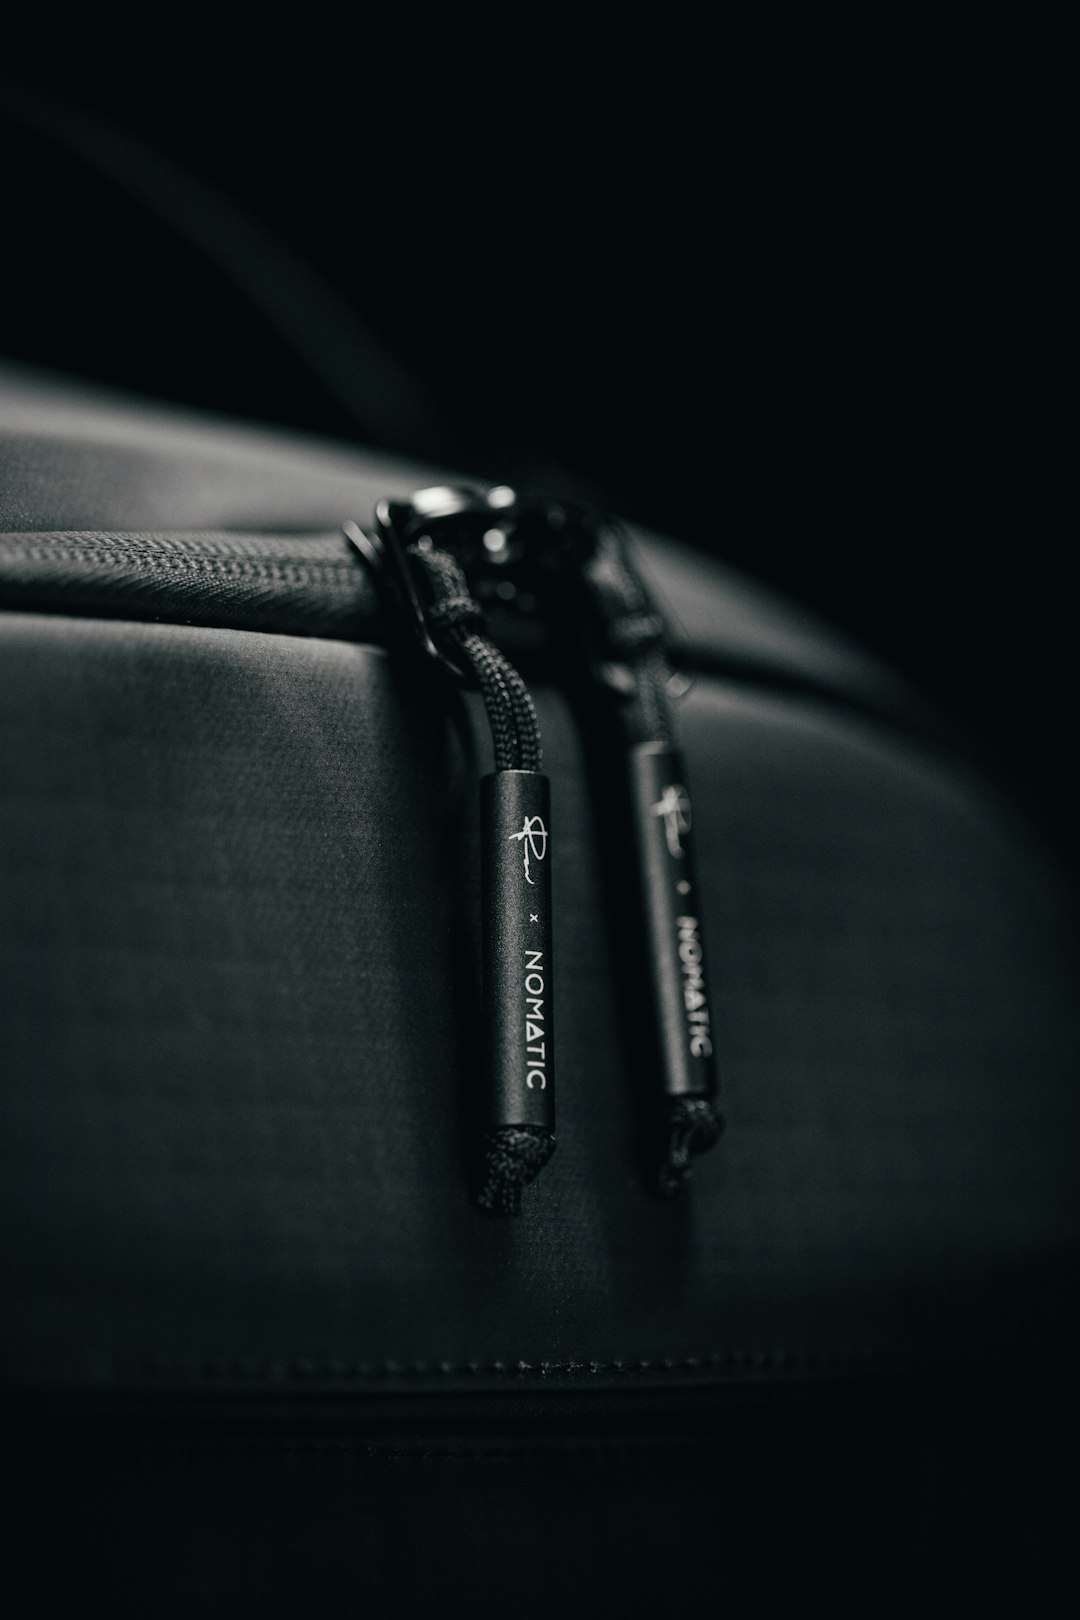 black leather bag in grayscale photography